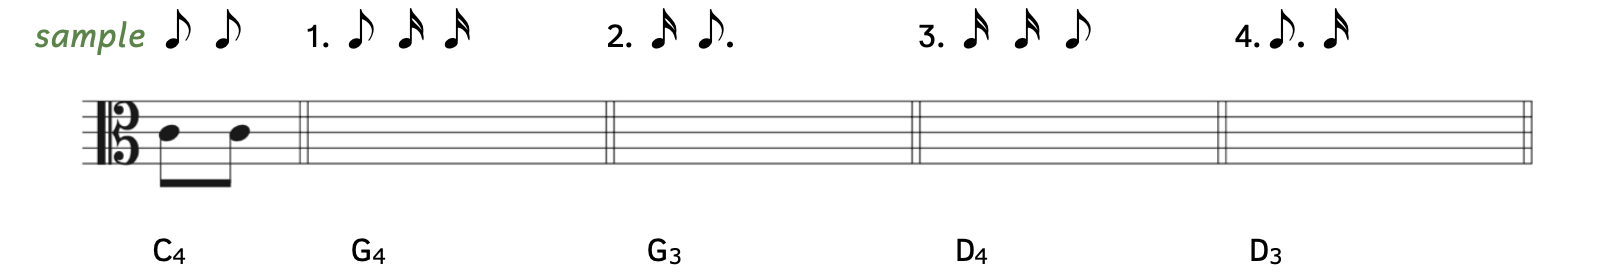 Exercise correctly writing rhythms in alto clef. The sample shows two eighth notes and the pitch C4. The sample's answer shows two beamed eighth notes on the third line of the staff. Number 1 asks for an eighth note and two sixteenth notes on G4. Number 2 asks for a sixteenth note and a dotted eighth note on G3. Number 3 asks for two sixteenth notes and an eighth note on D4. Number 4 asks for a dotted eighth note and sixteenth note on D3.